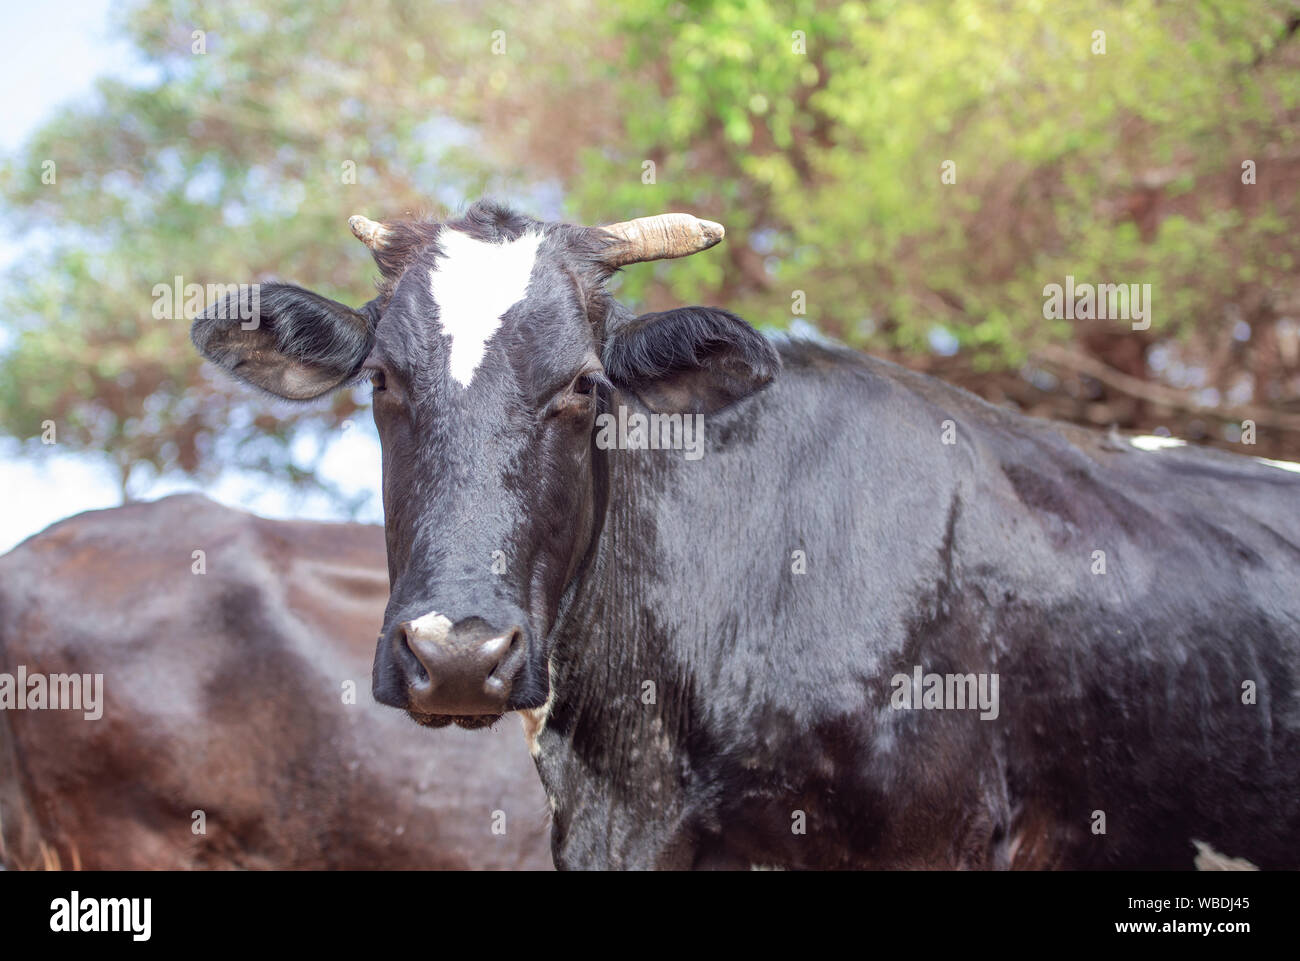 Black cow in the pasture. Concept image of farm life. Stock Photo